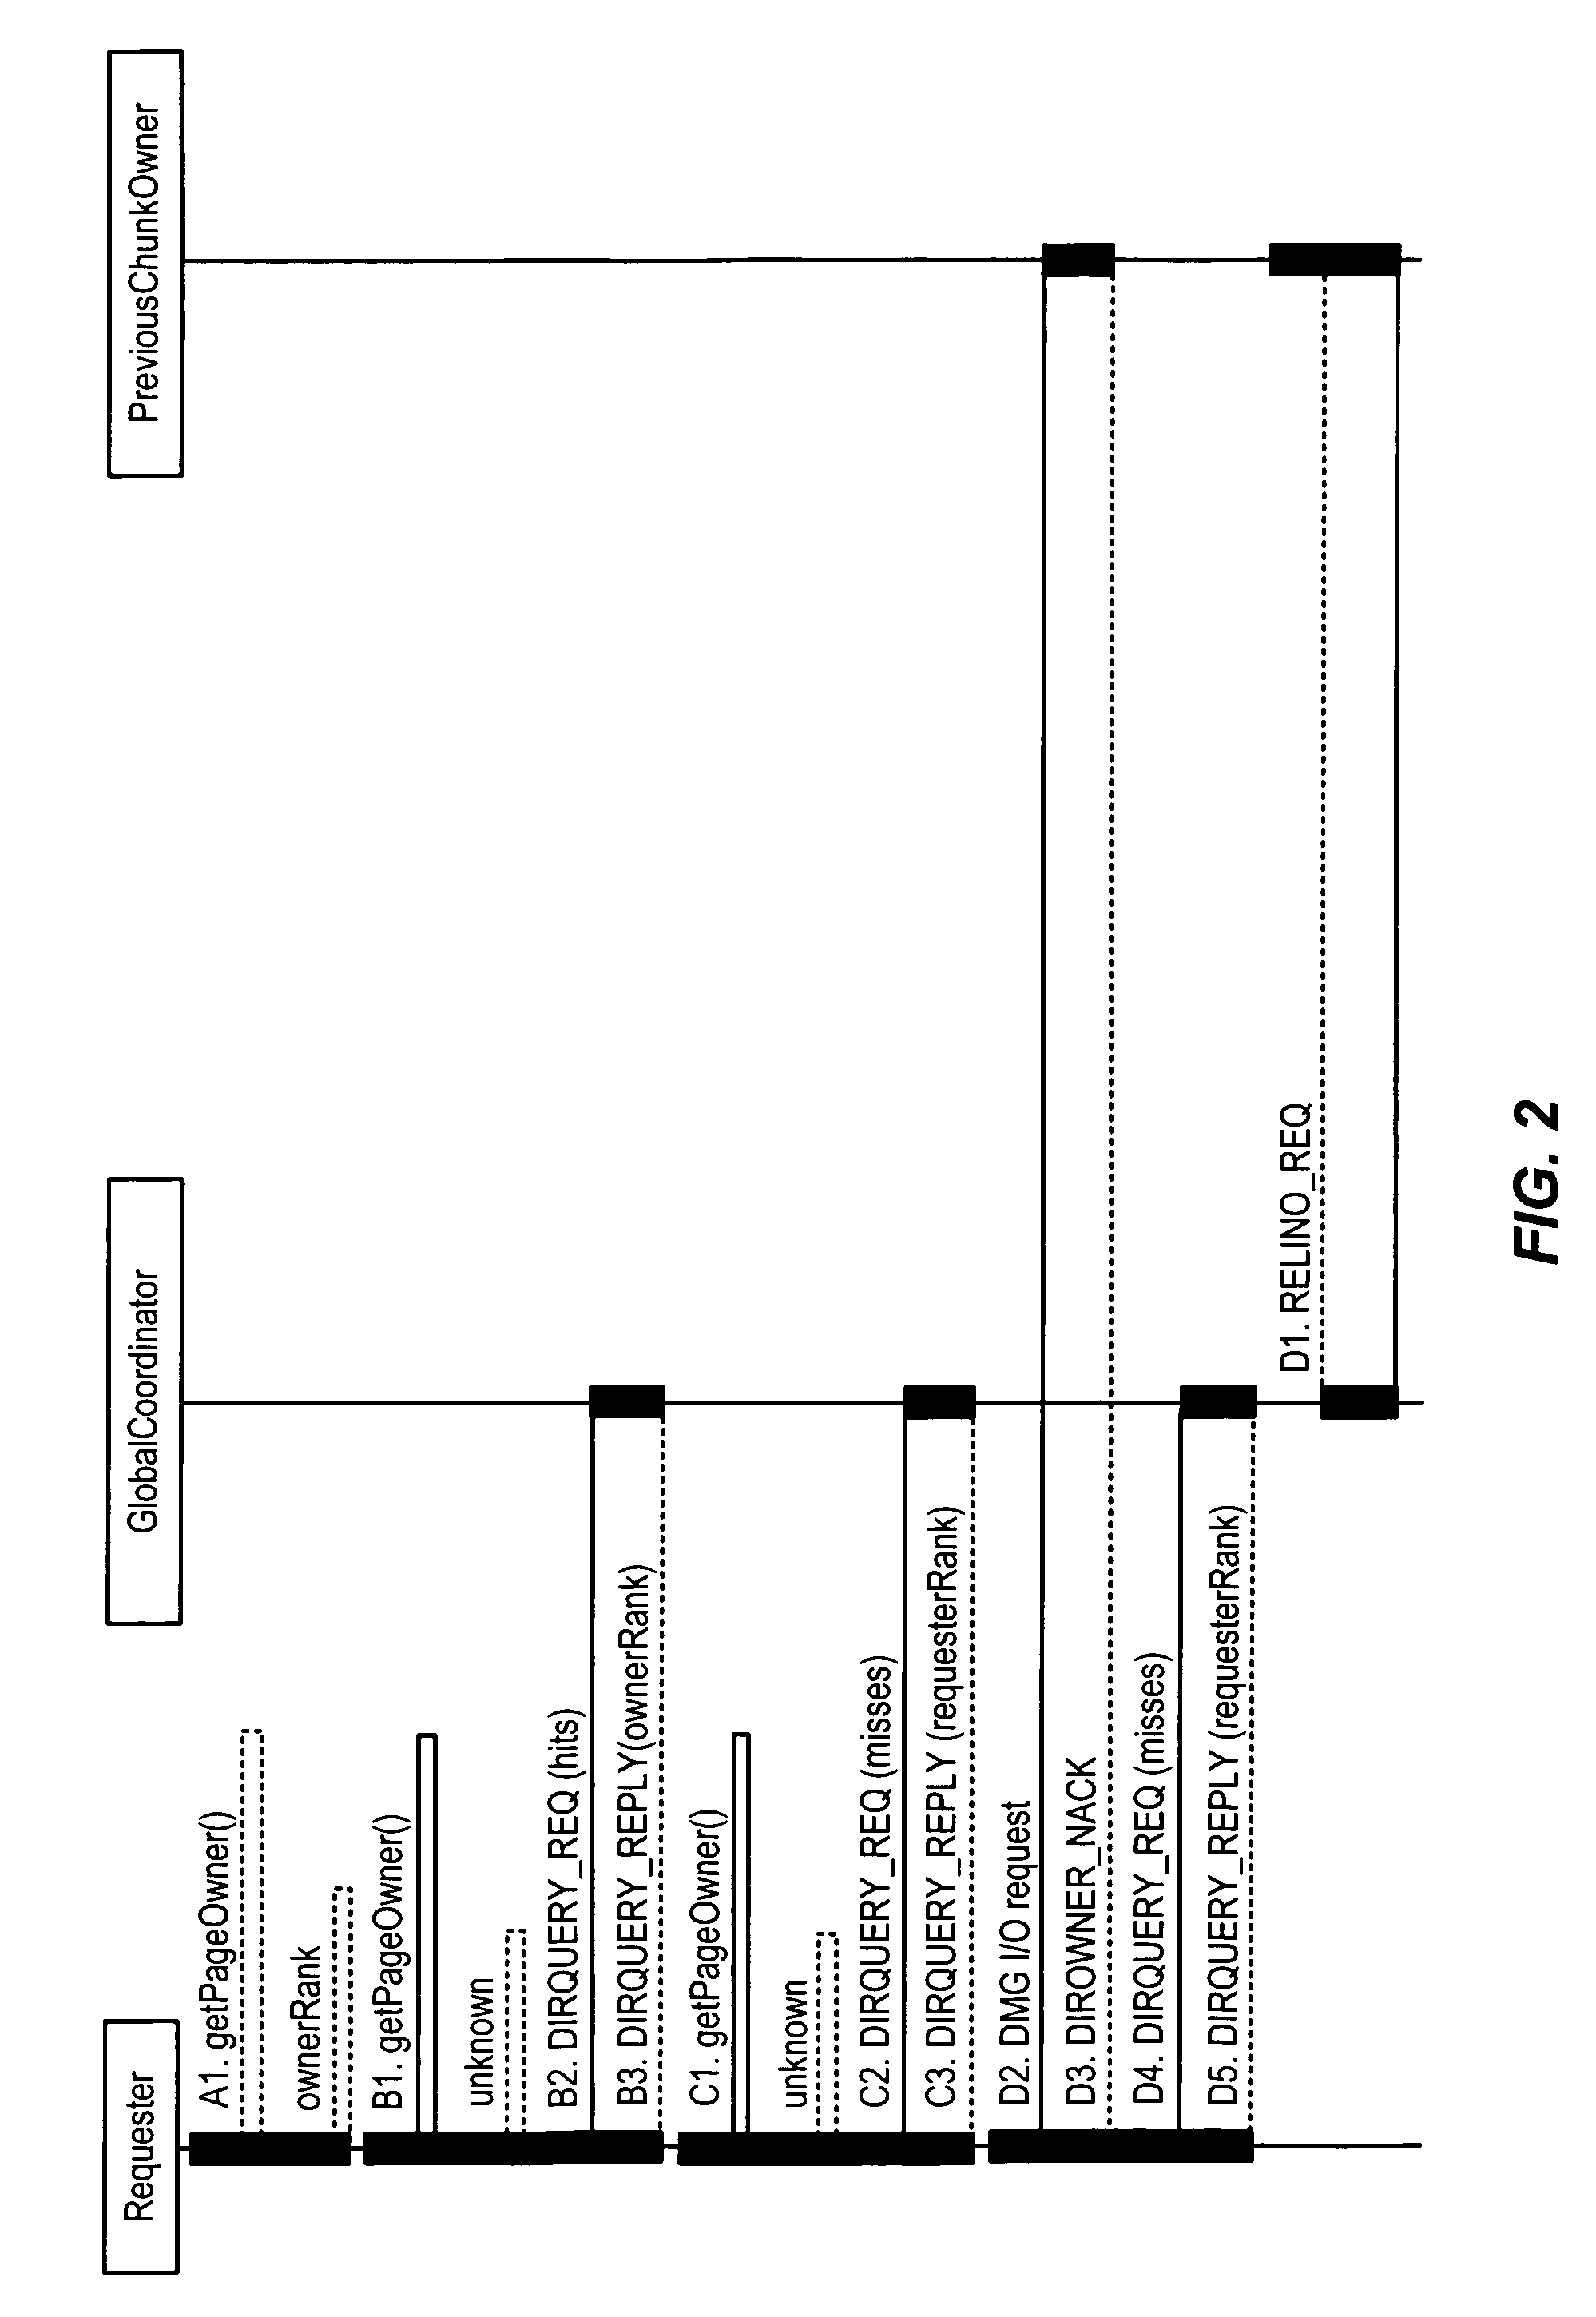 Systems and methods for providing distributed cache coherence